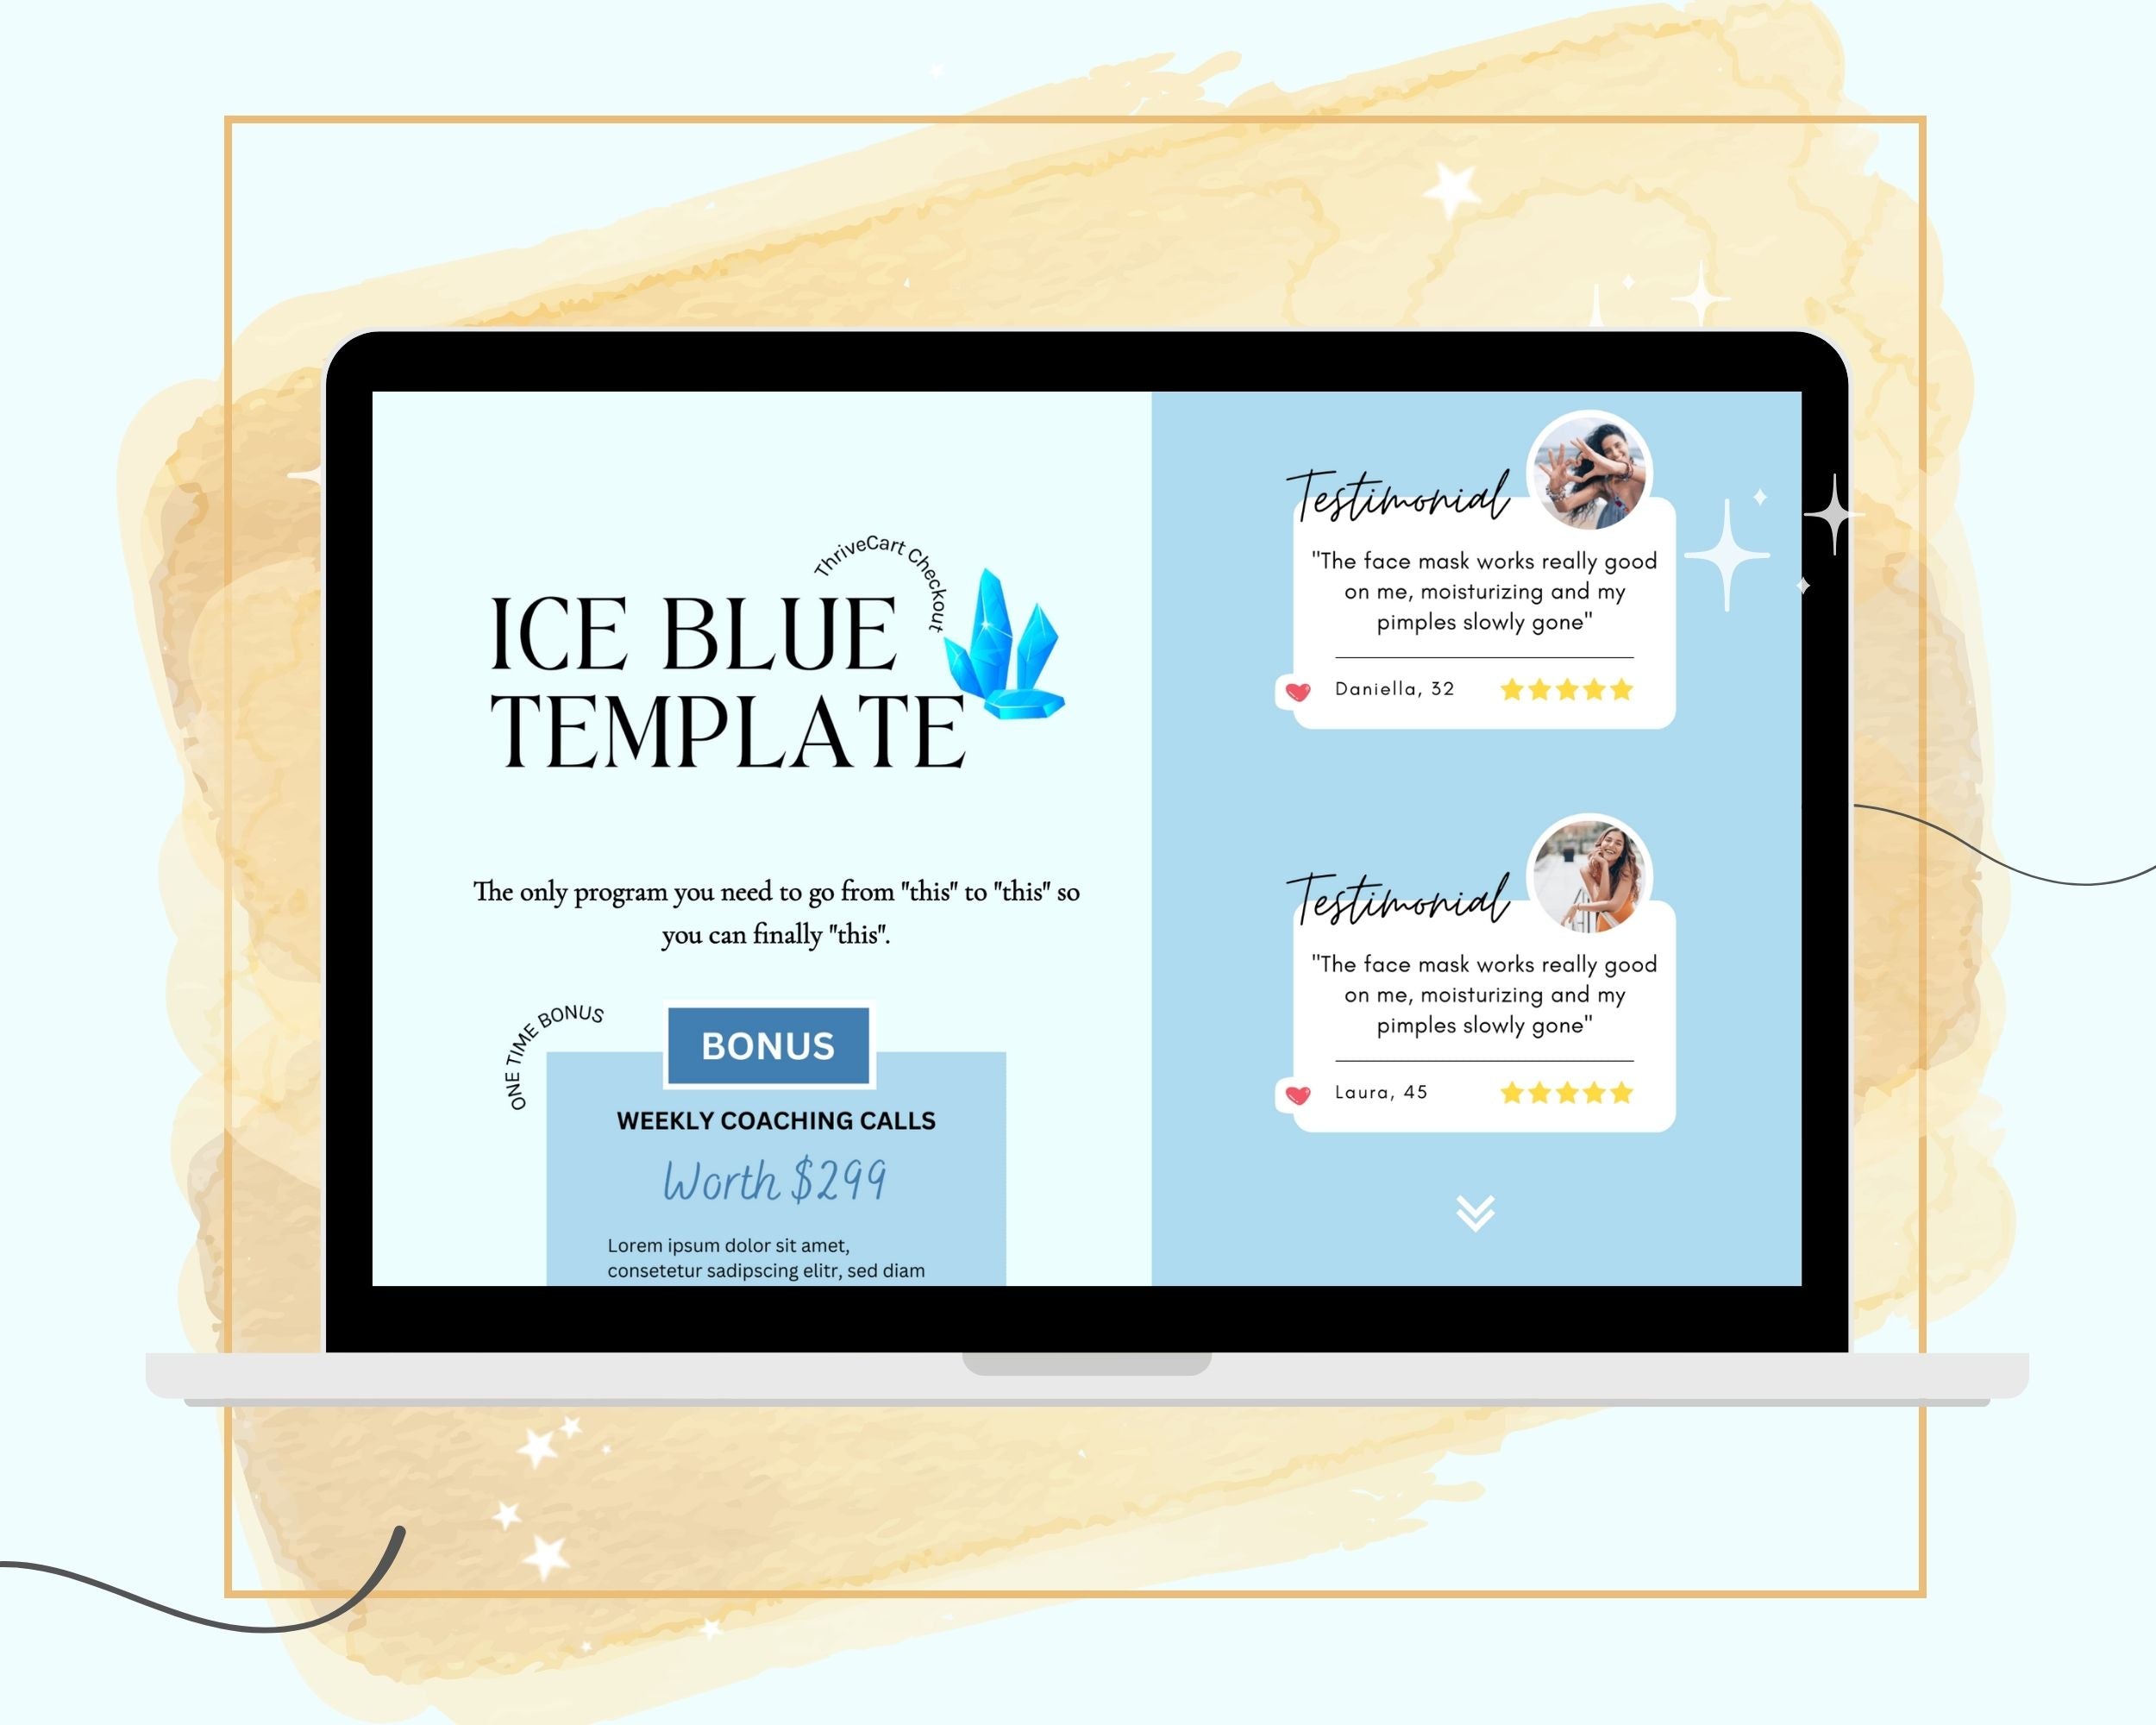 Ice Blue ThriveCart Checkout Template